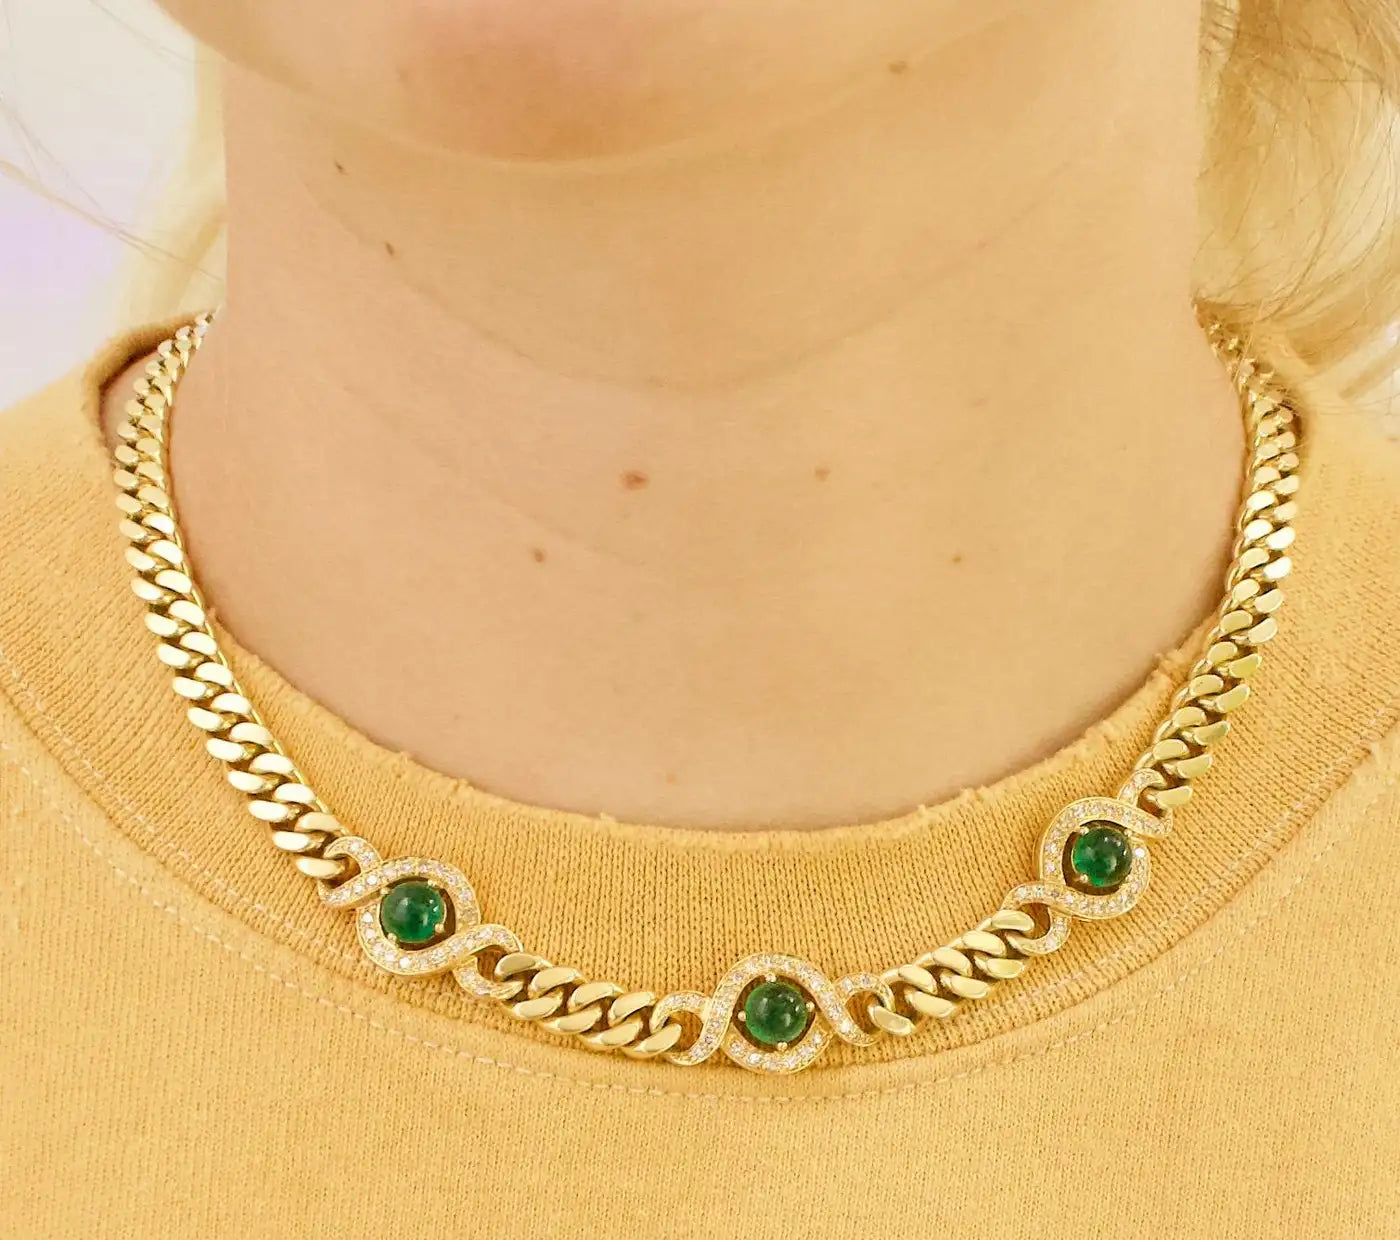 Emerald and Diamond Vintage "Cuban Link" Necklace in 18k Yellow Gold